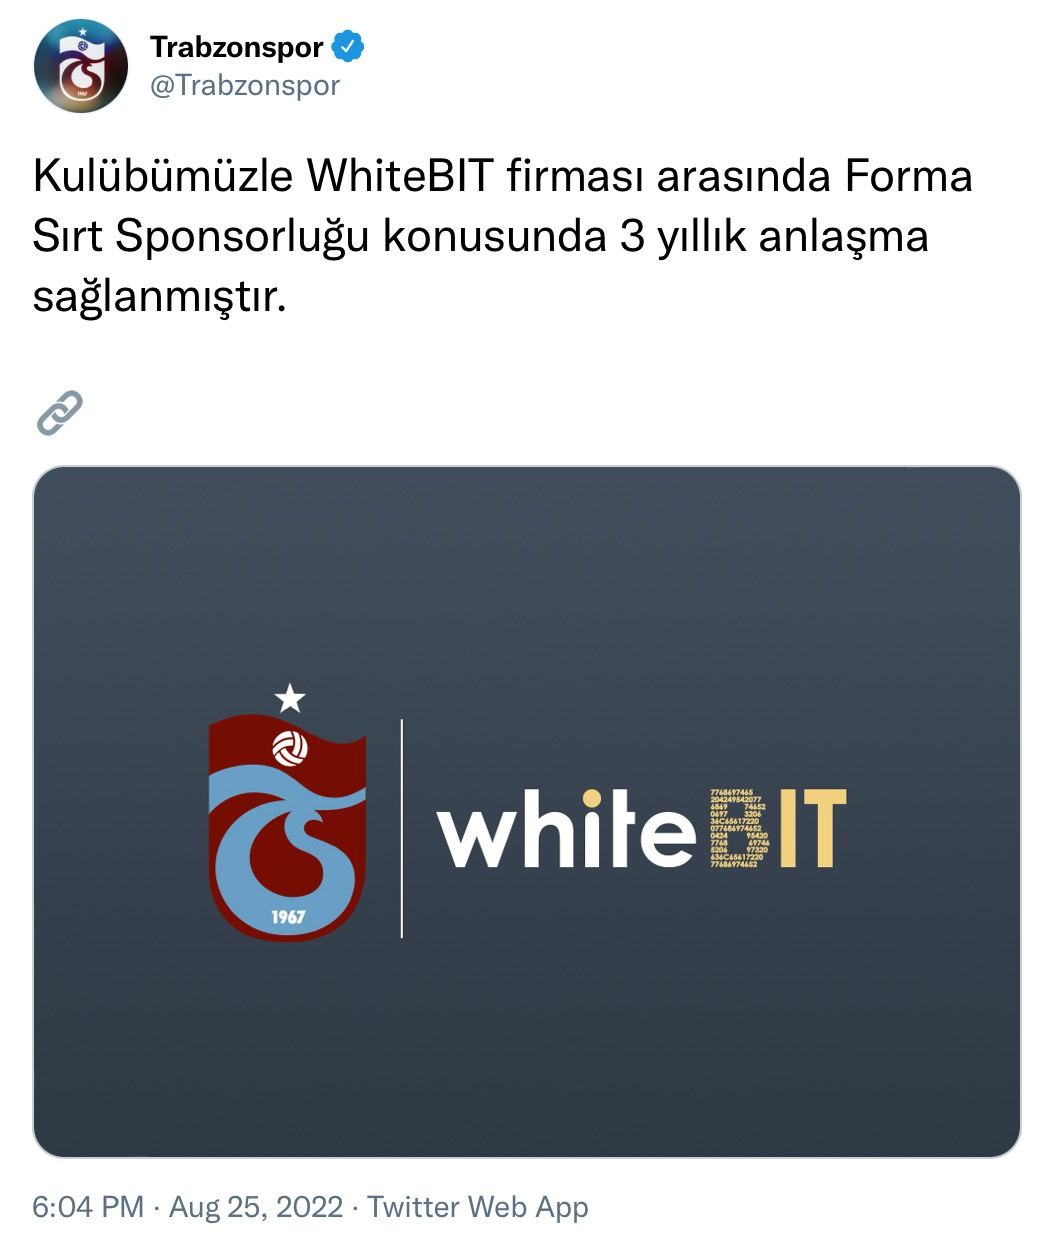 Post from Trabzonspor official Twitter ("A 3-year agreement has been signed between  our club and WhiteBIT company  on Jersey Back Sponsorship.")